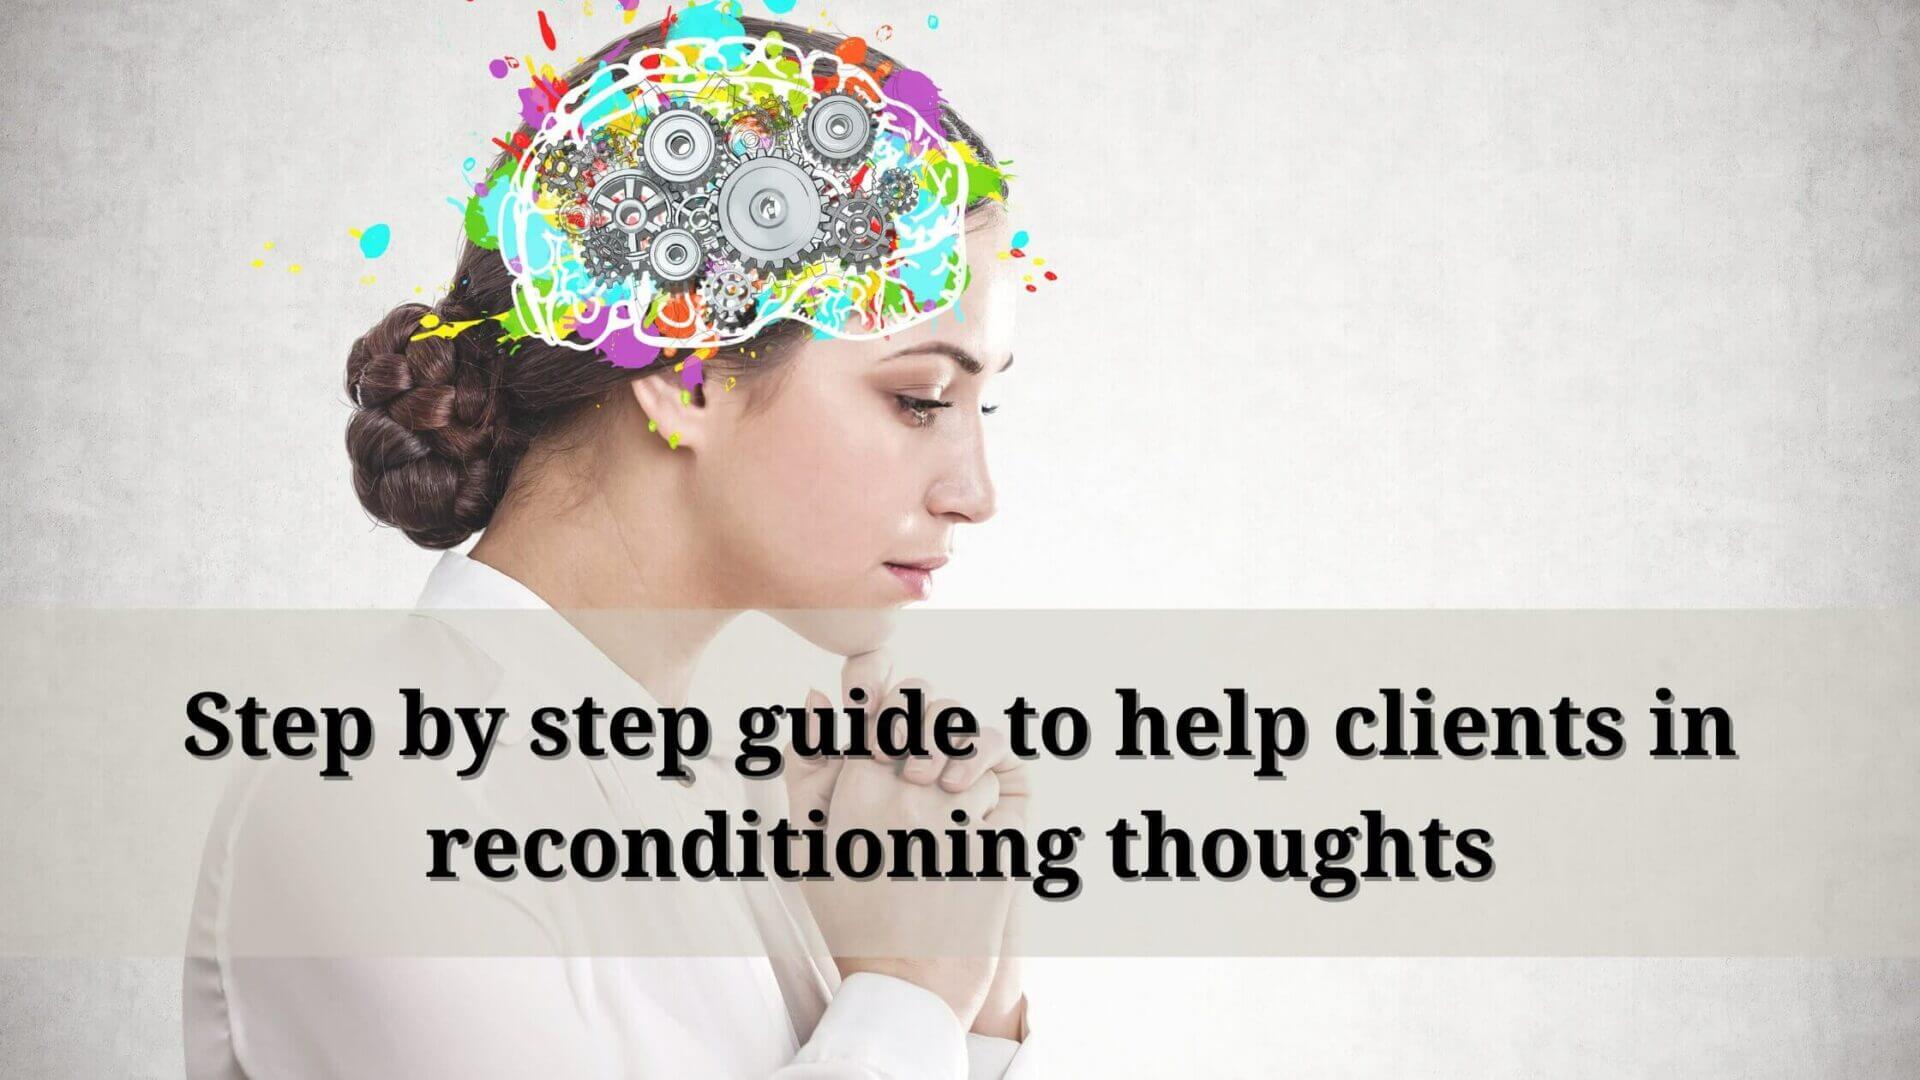 reconditioning thoughts and emotions 2 - Step by step guide to help clients in reconditioning thoughts